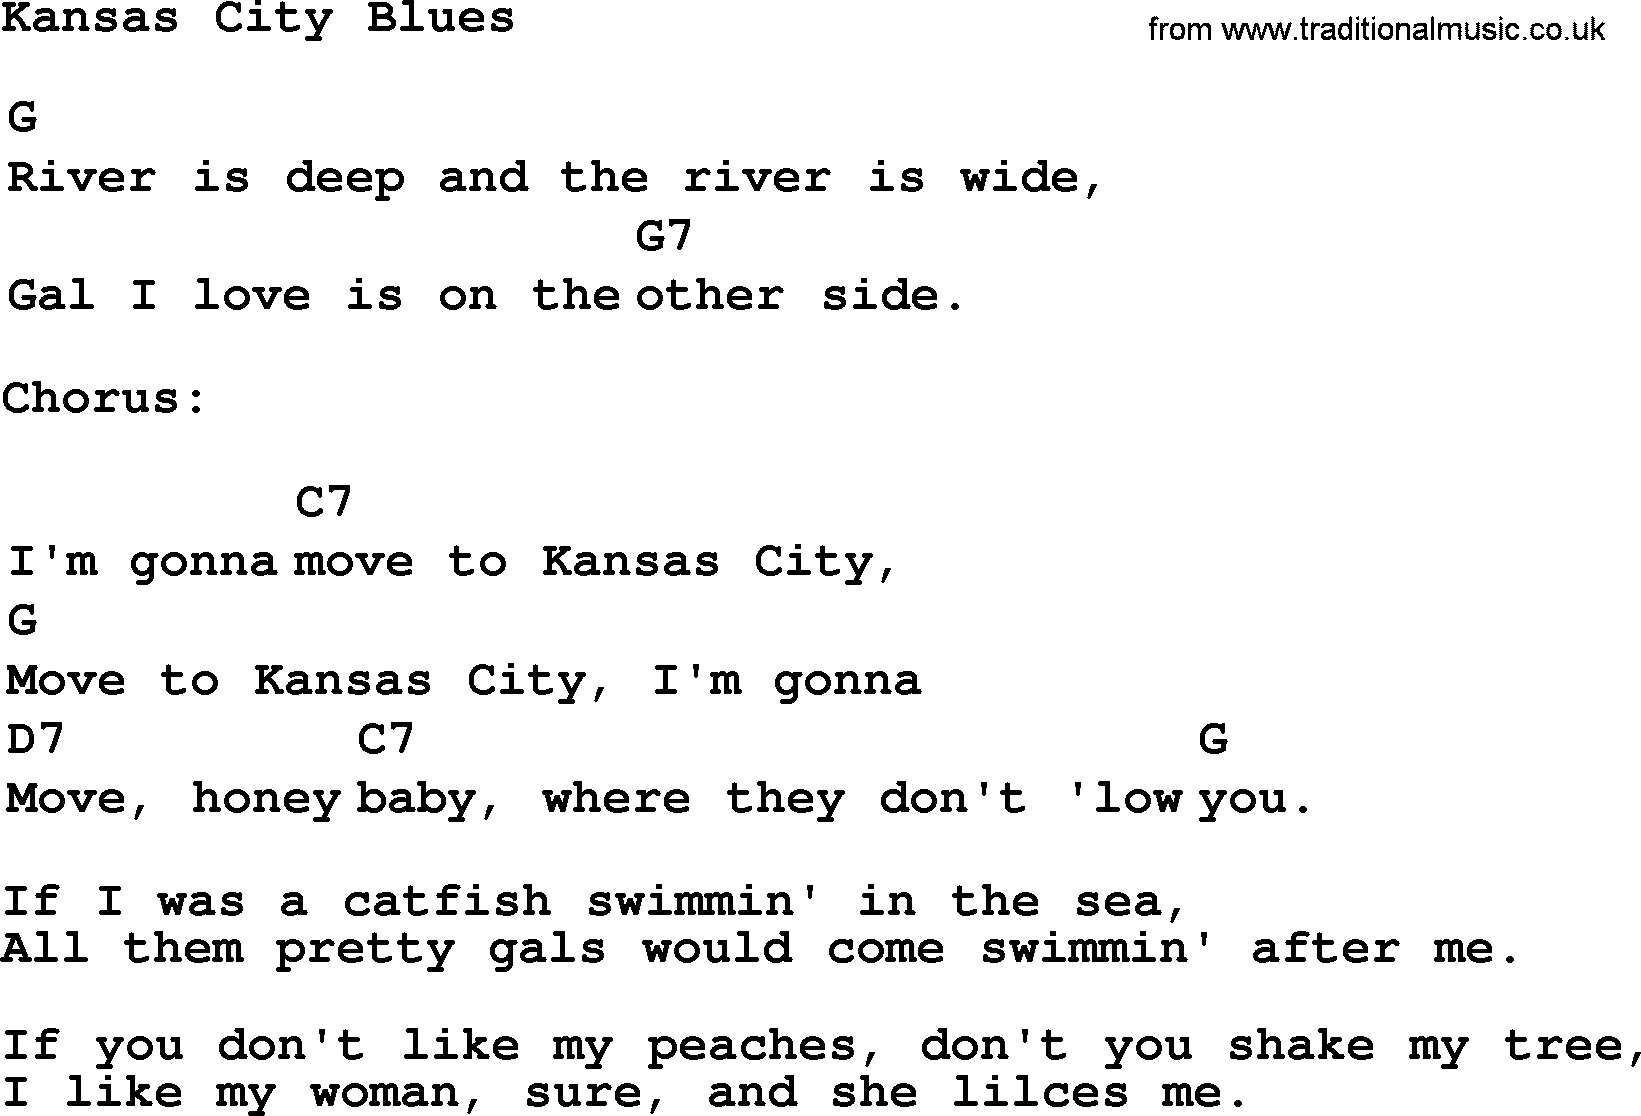 Top 1000 Most Popular Folk and Old-time Songs: Kansas City Blues, lyrics and chords